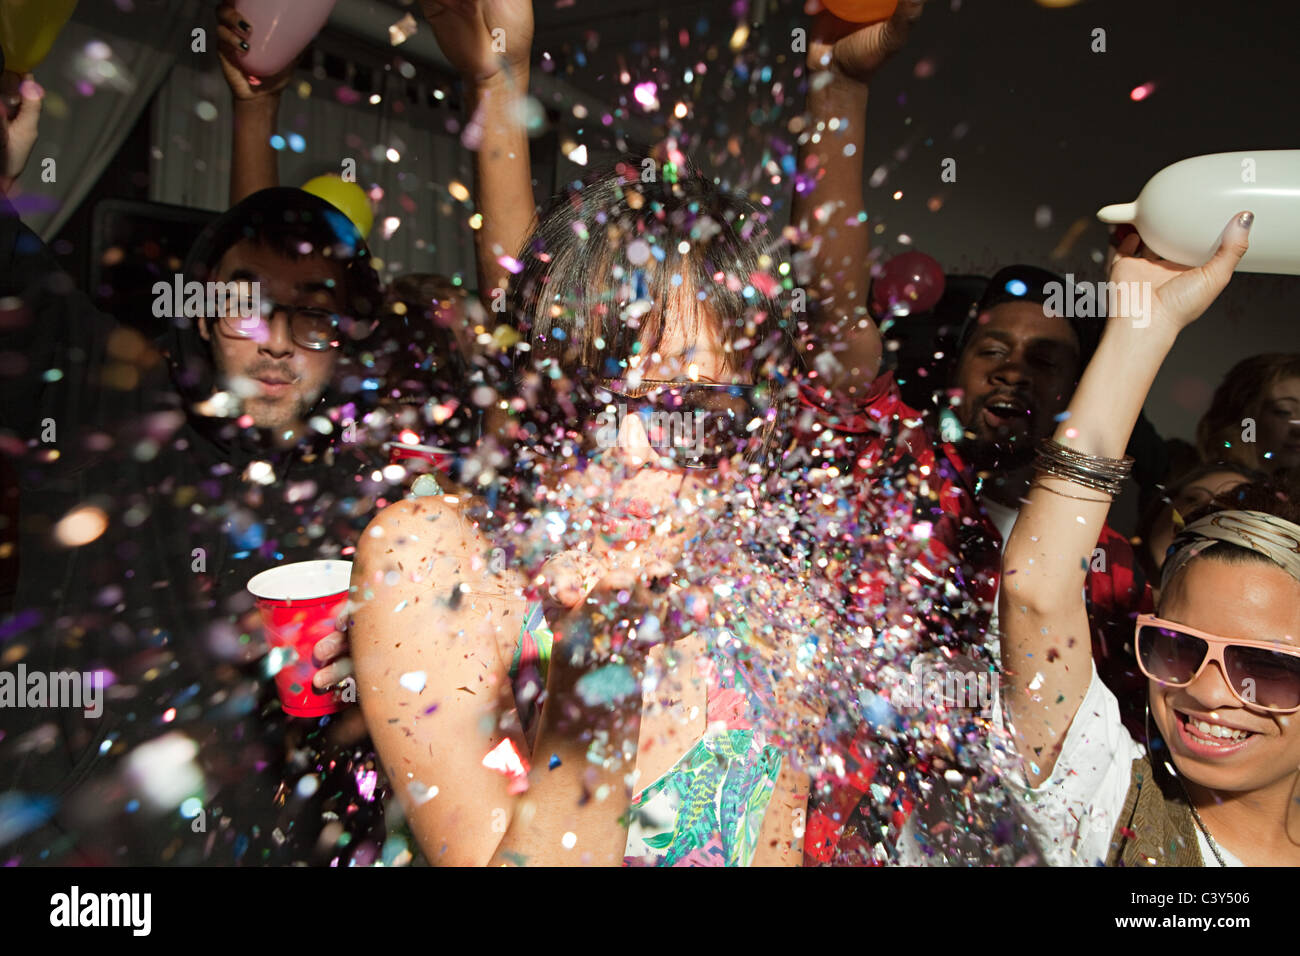 People dancing at party, woman blowing glitter Stock Photo